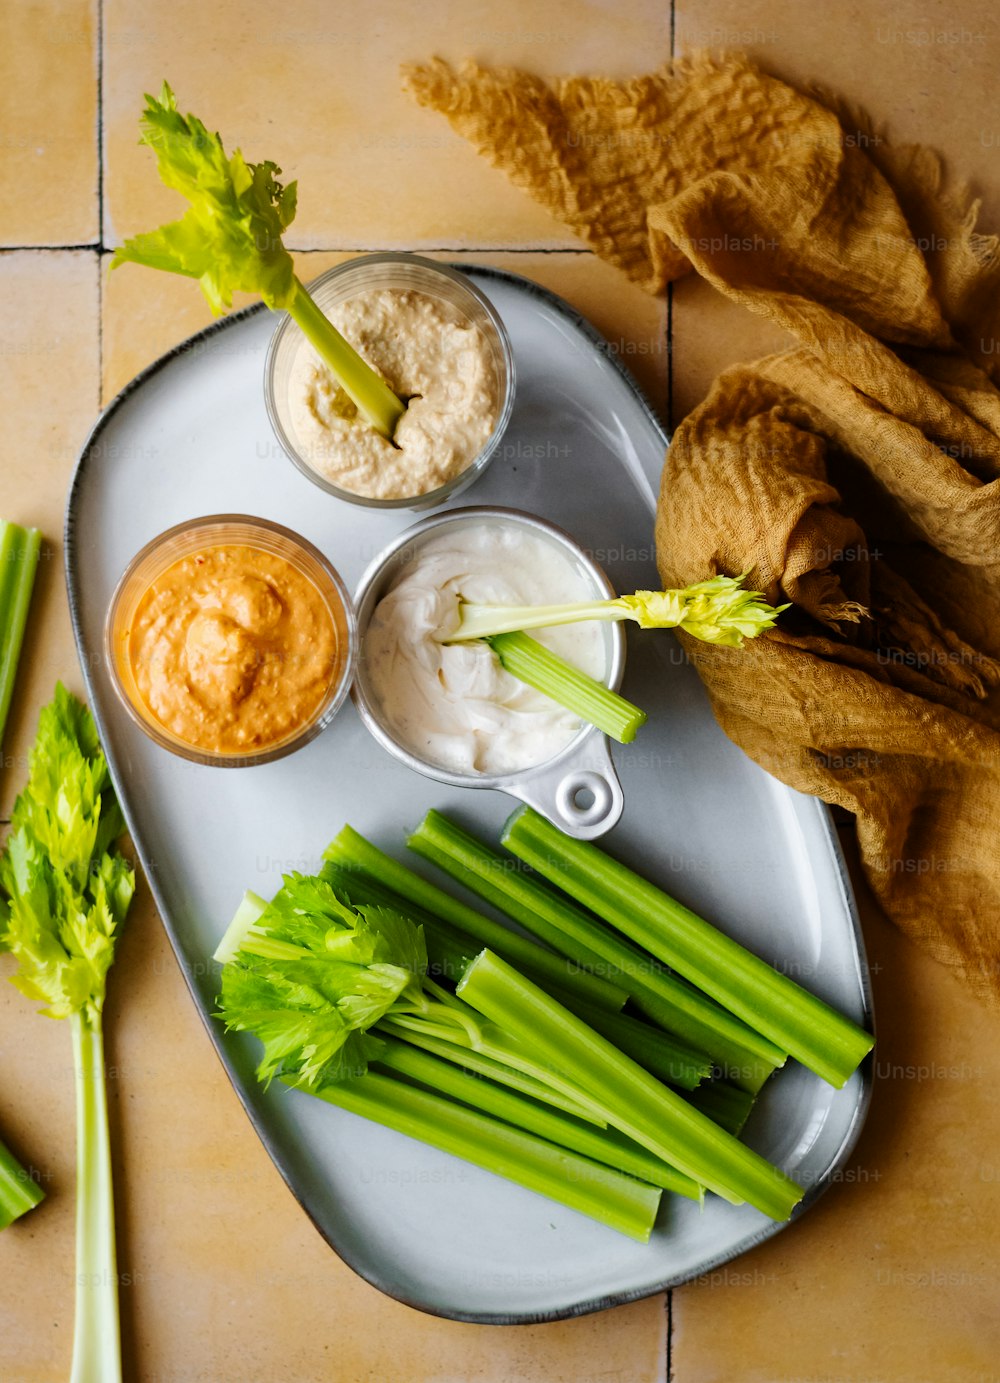 a plate with celery, dips, and bread on it